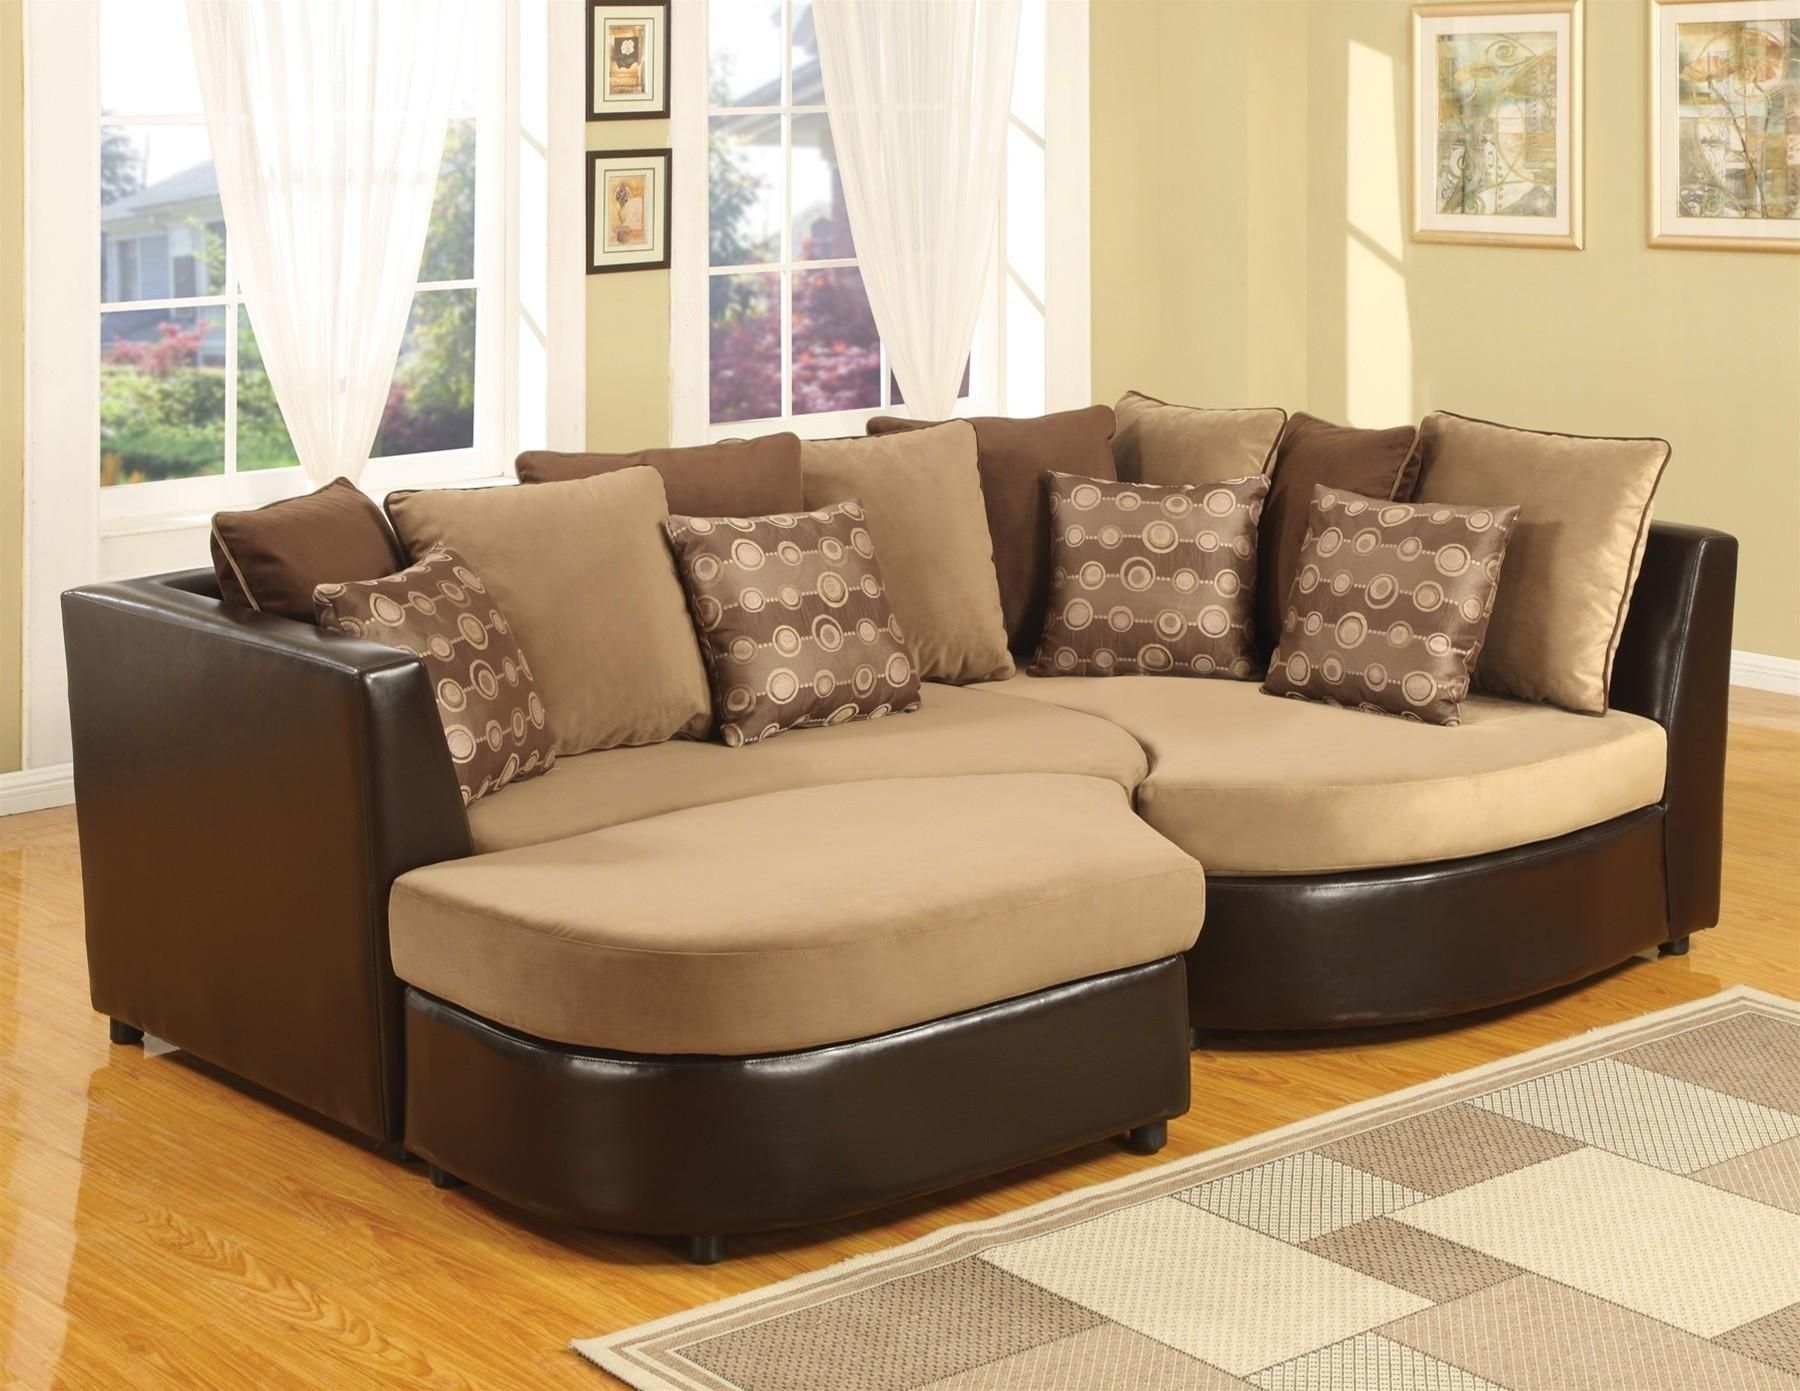 Sofas Center : Oversized Double Sofa Chair And For Staging Inside Oversized Sofa Chairs (View 2 of 20)